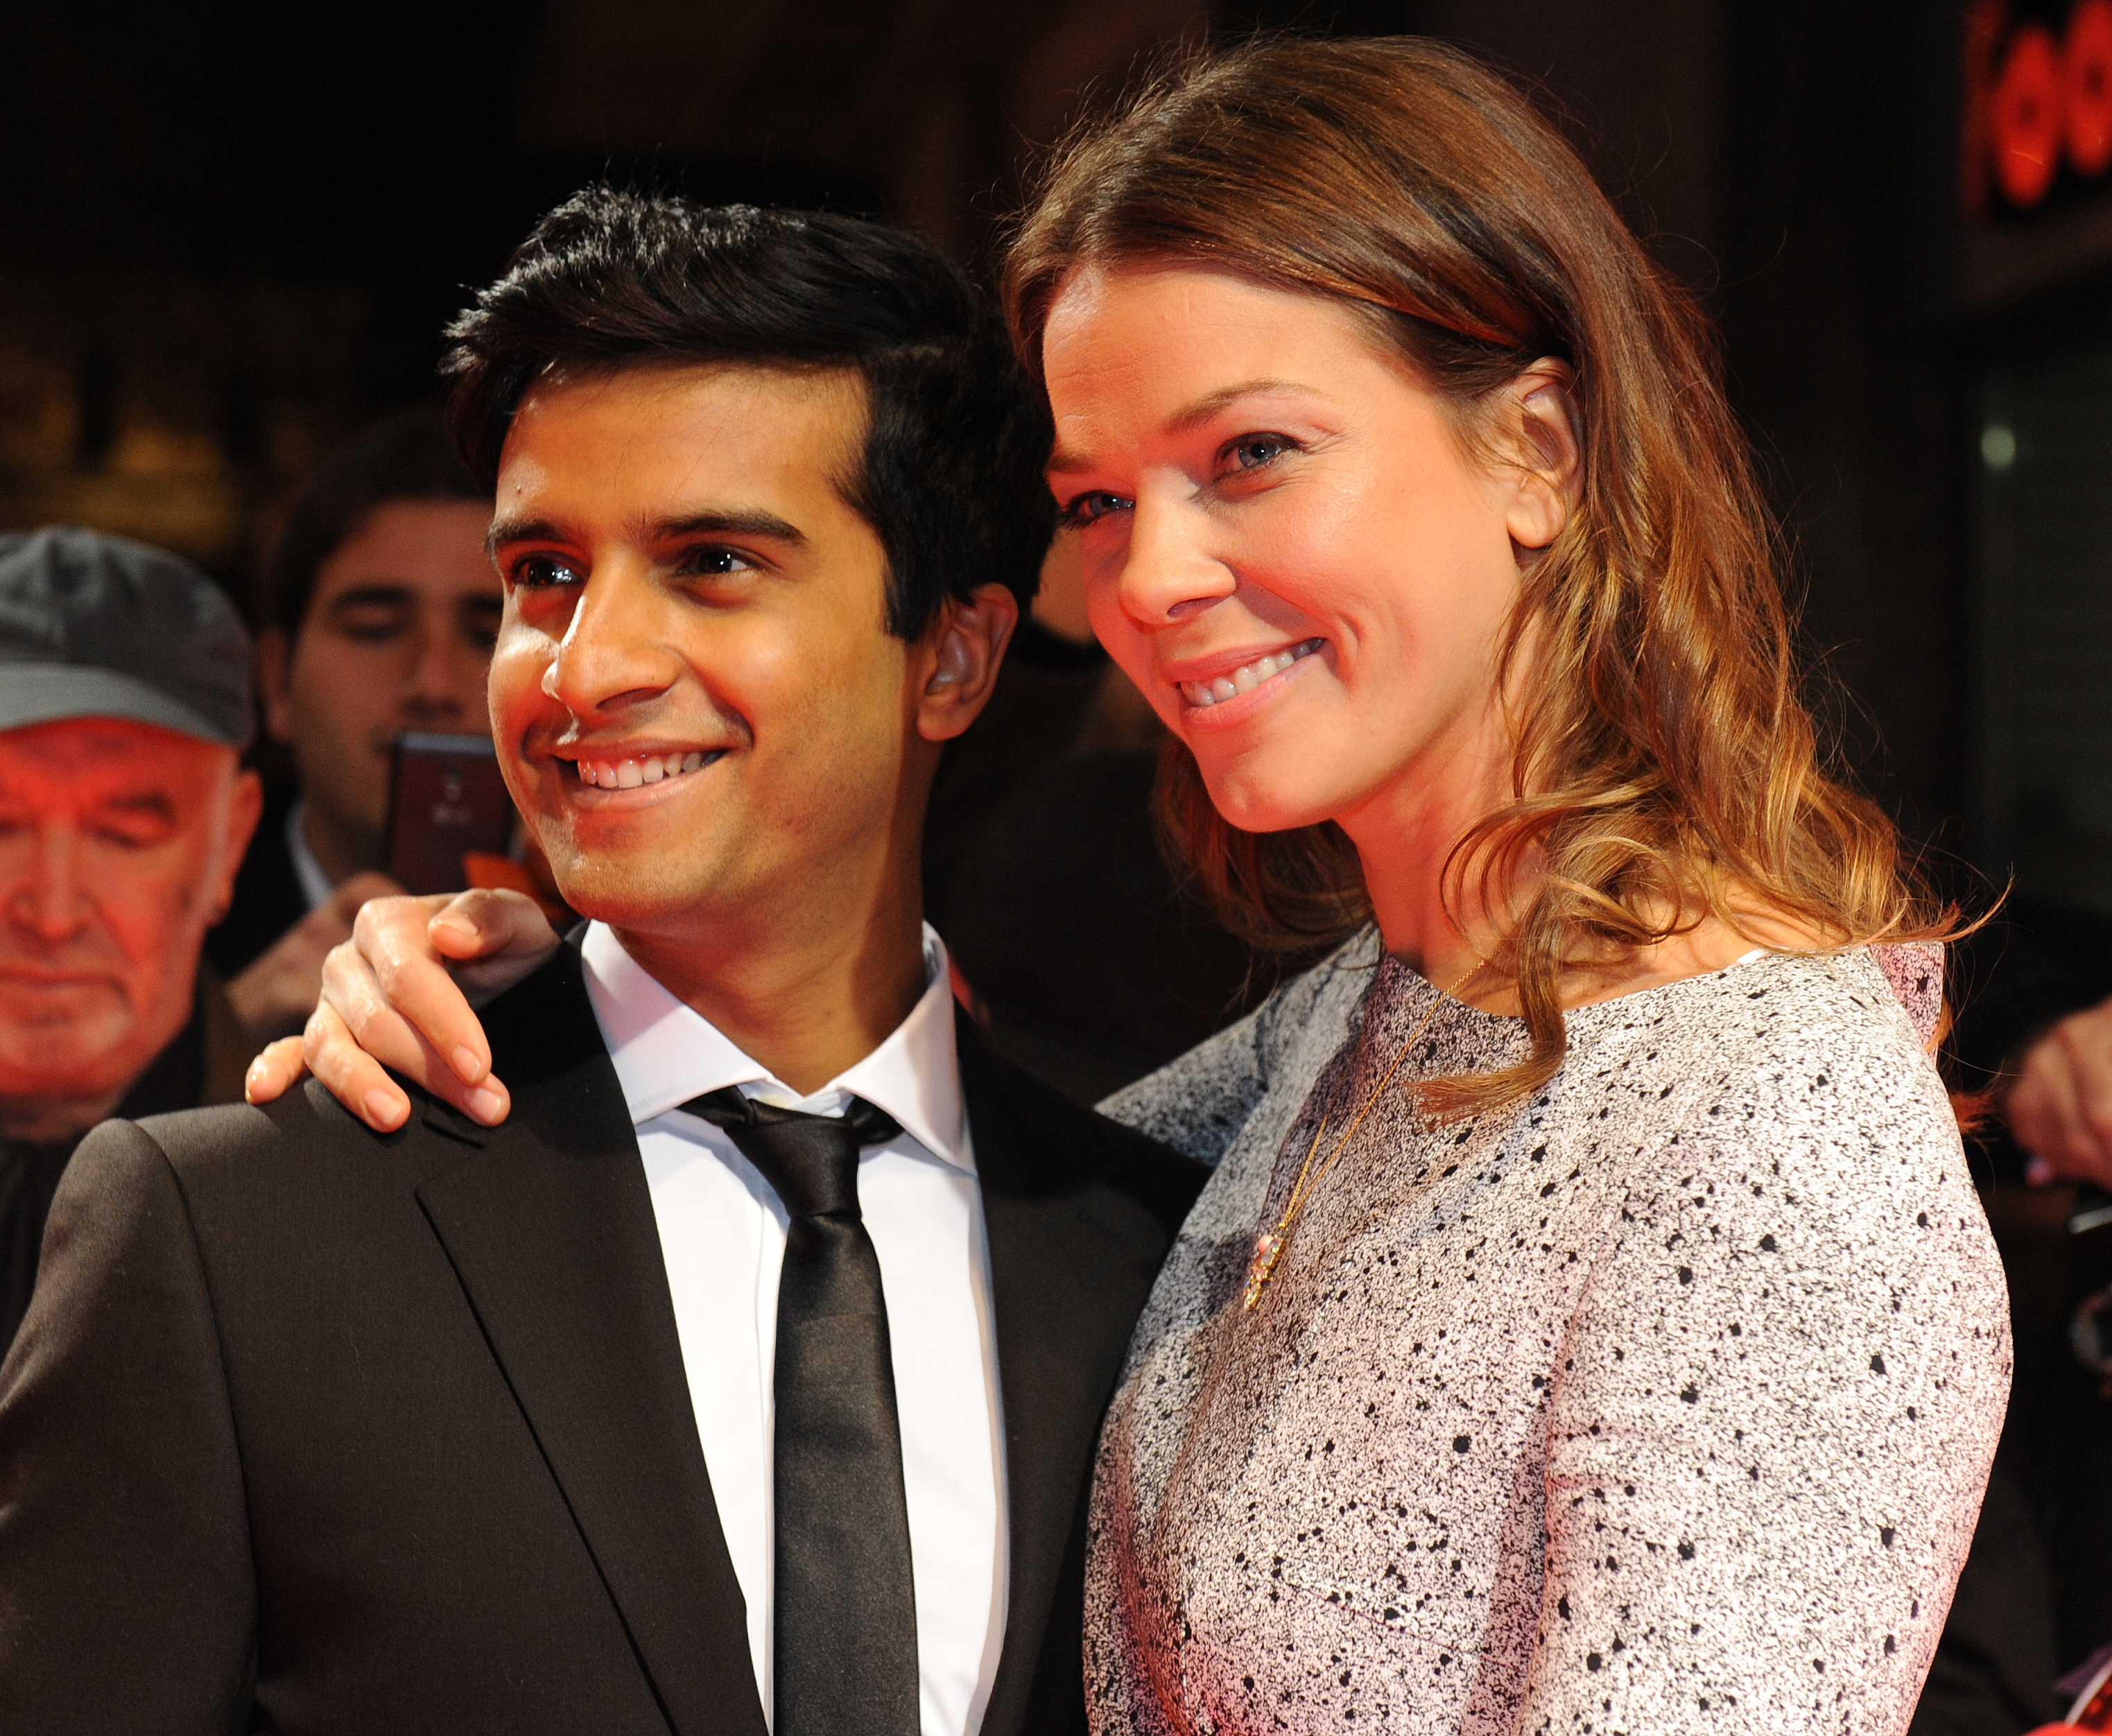 With The Cook (Der Koch) co-star, Jessica Schwarz at the German premiere.